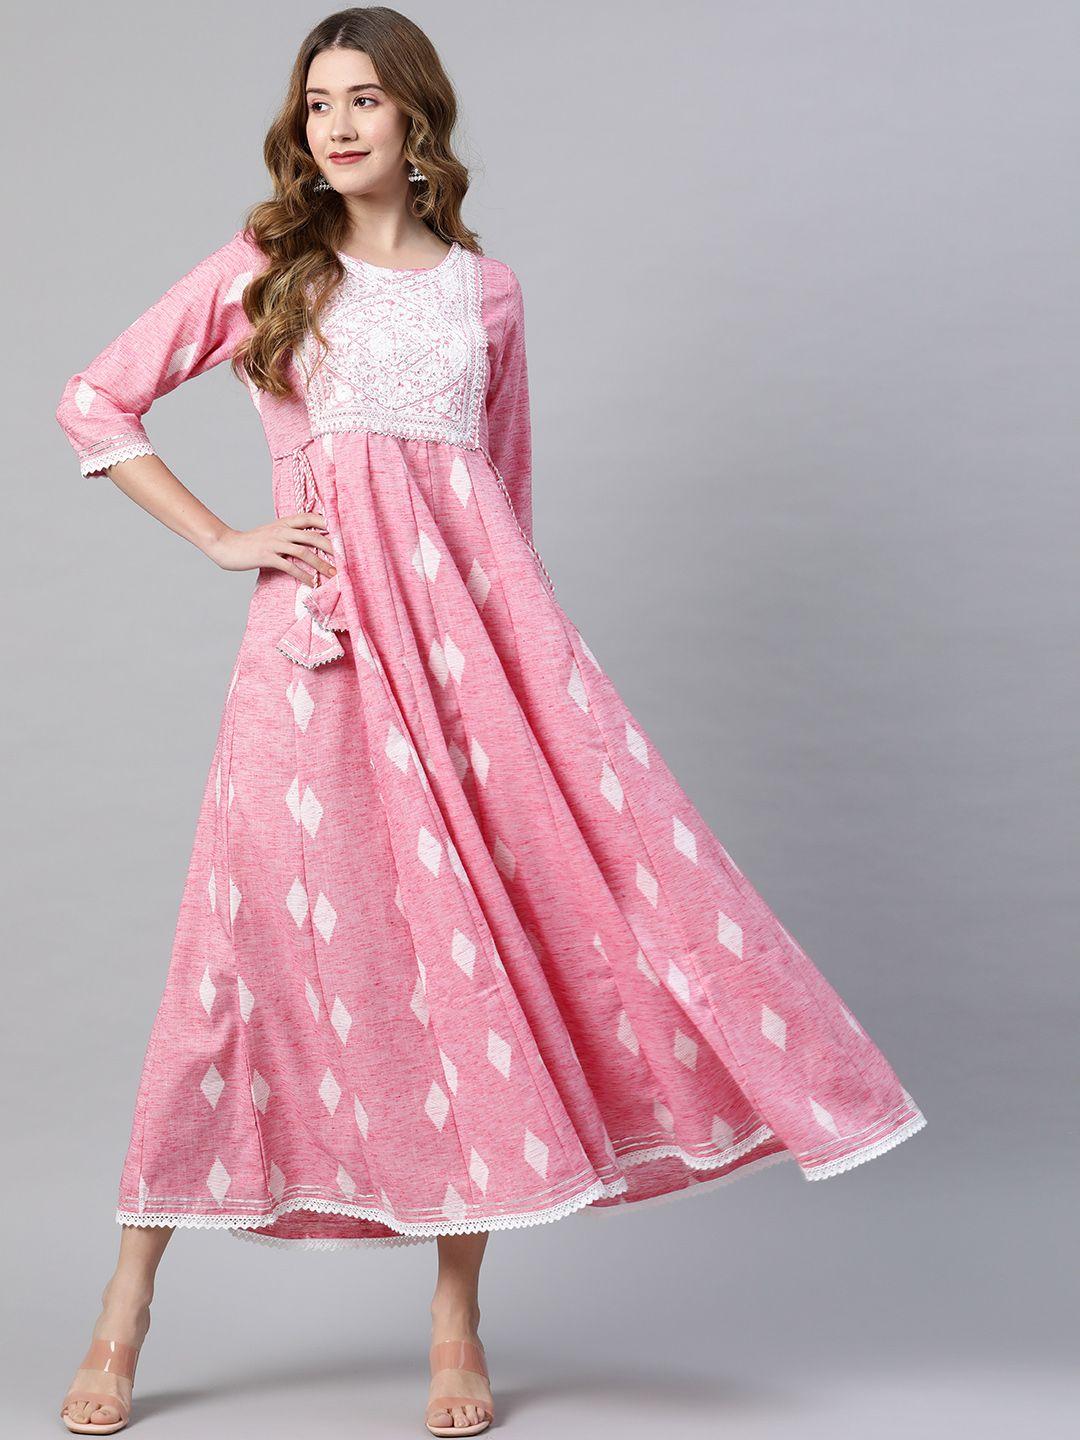 vbuyz pink floral embroidered ethnic maxi dress